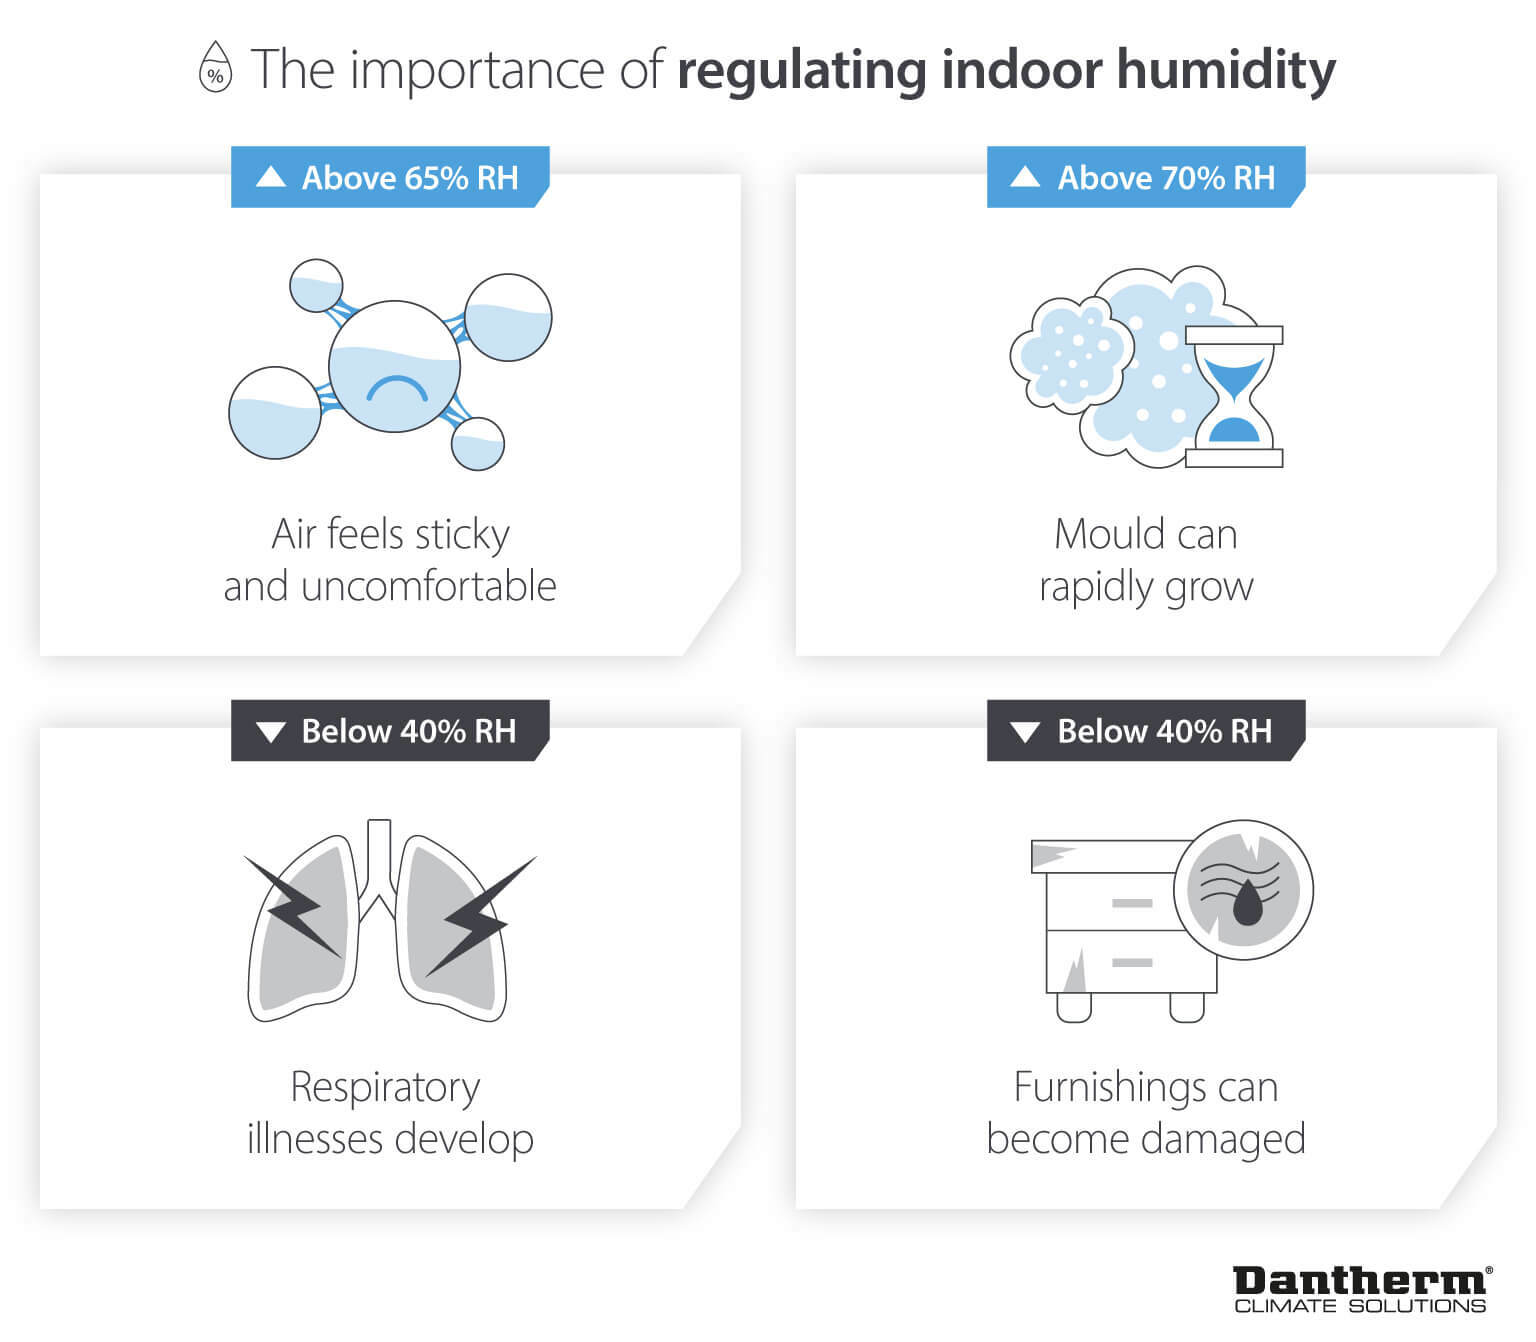 Importance of controlling indoor air humidity to prevent mould, respiratory illnesses or damage to property and furniture - infographic